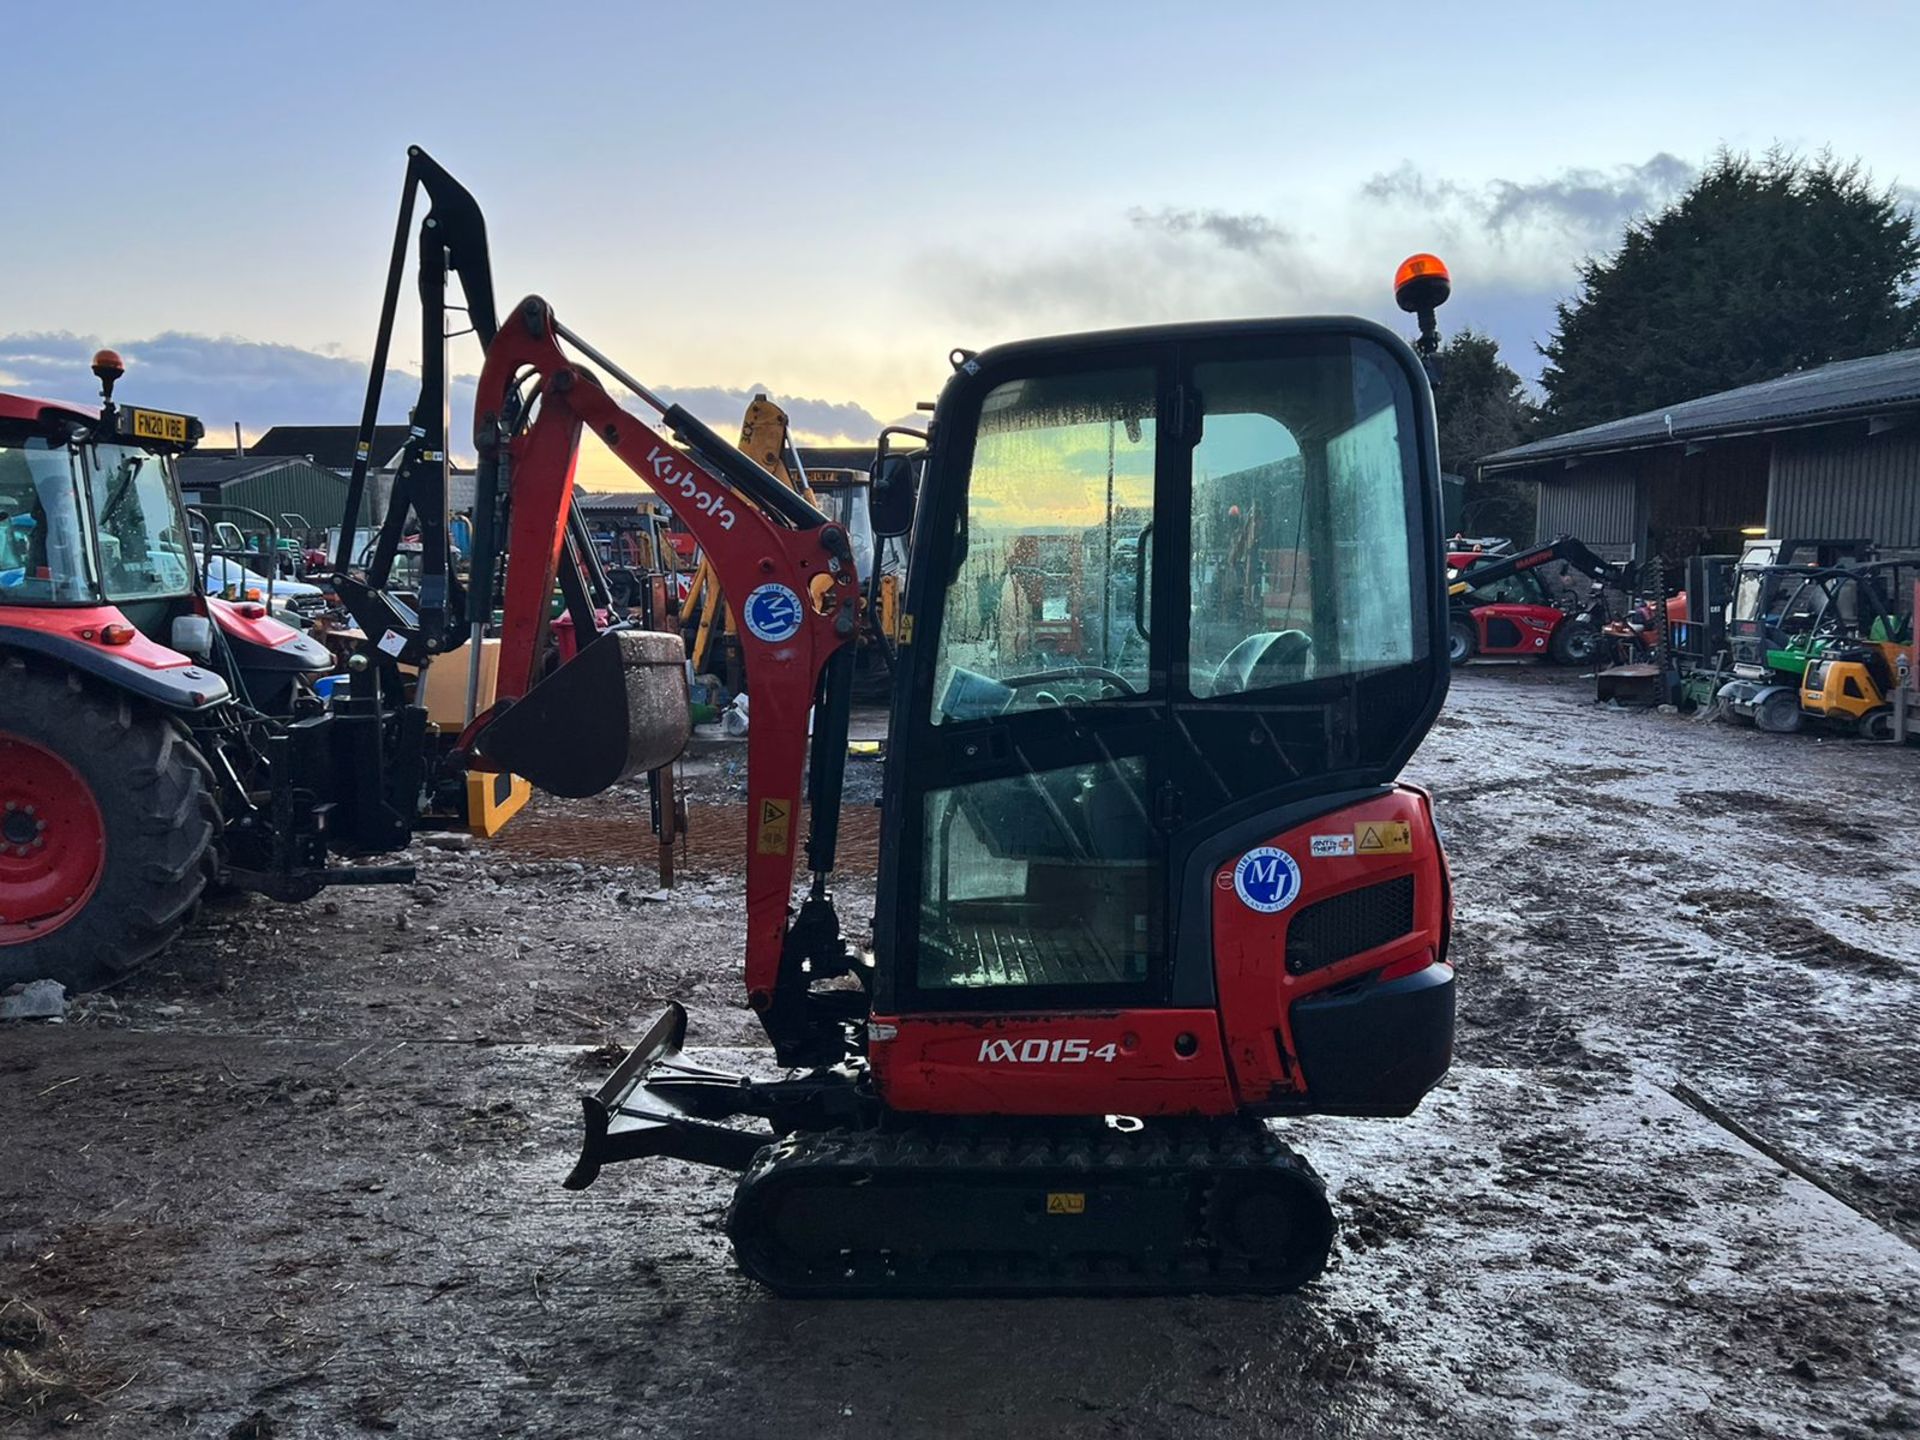 2015 KUBOTA KX015-4 1.5 TON MINI DIGGER, RUNS DRIVES DIGS, SHOWING A LOW AND GENUINE 1850 HOURS - Image 3 of 11